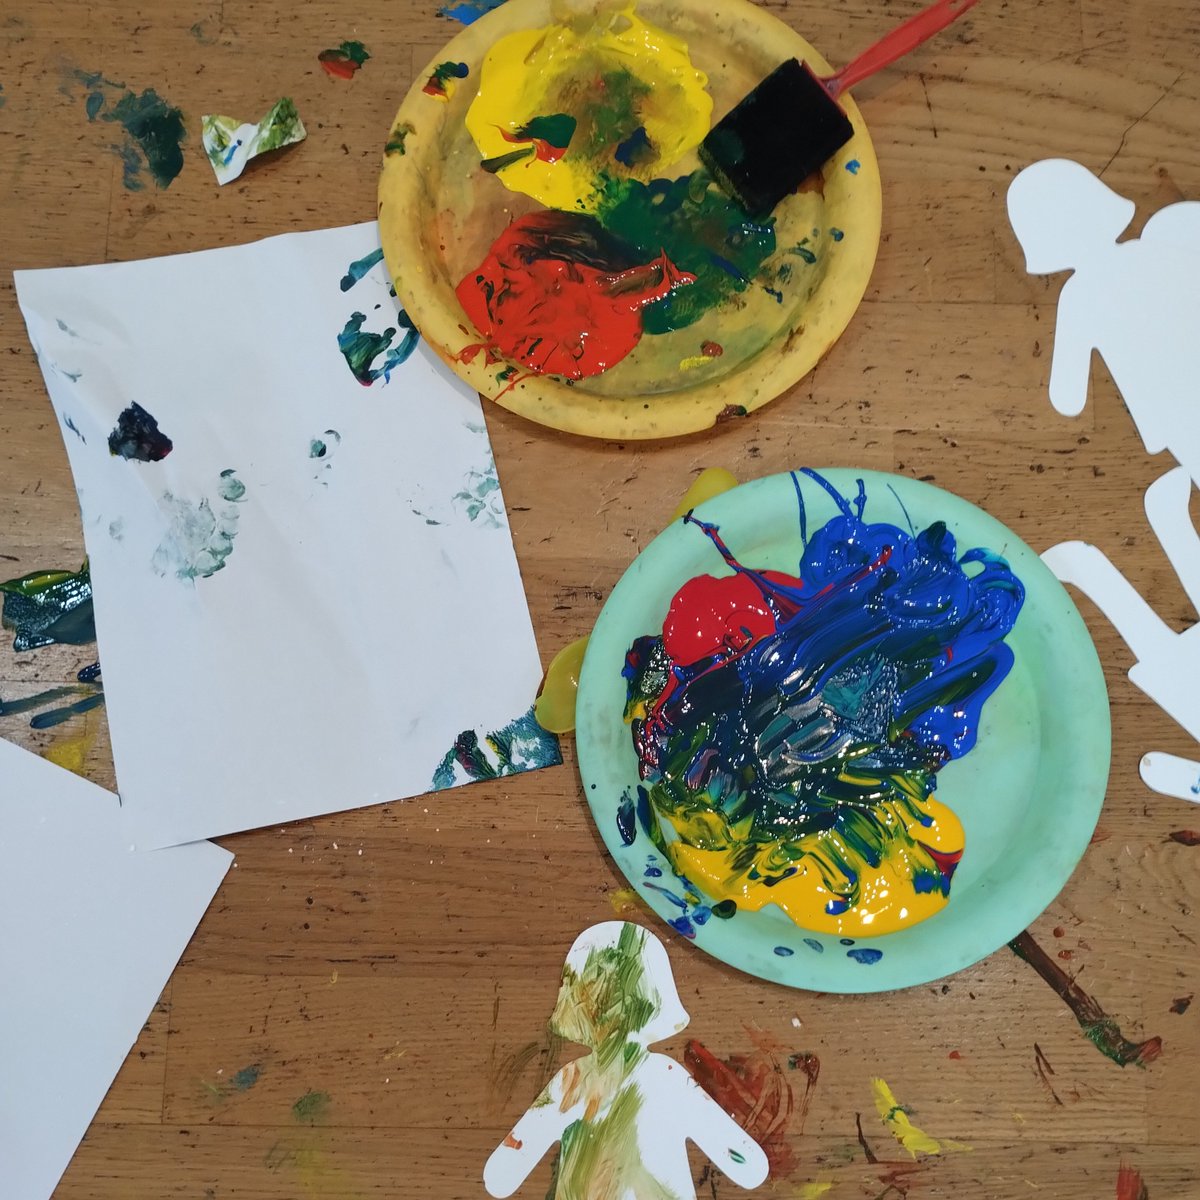 There are still spaces for the Wayfield Children and Family Hub messy play session happening tomorrow at 1:30-2:30pm 🎨

Join us for FREE messy fun 🖌

To book on, email childfriendly@medway.gov.uk 💌

#ChildFriendlyMedway #ArtsAndCrafts #MessyPlay